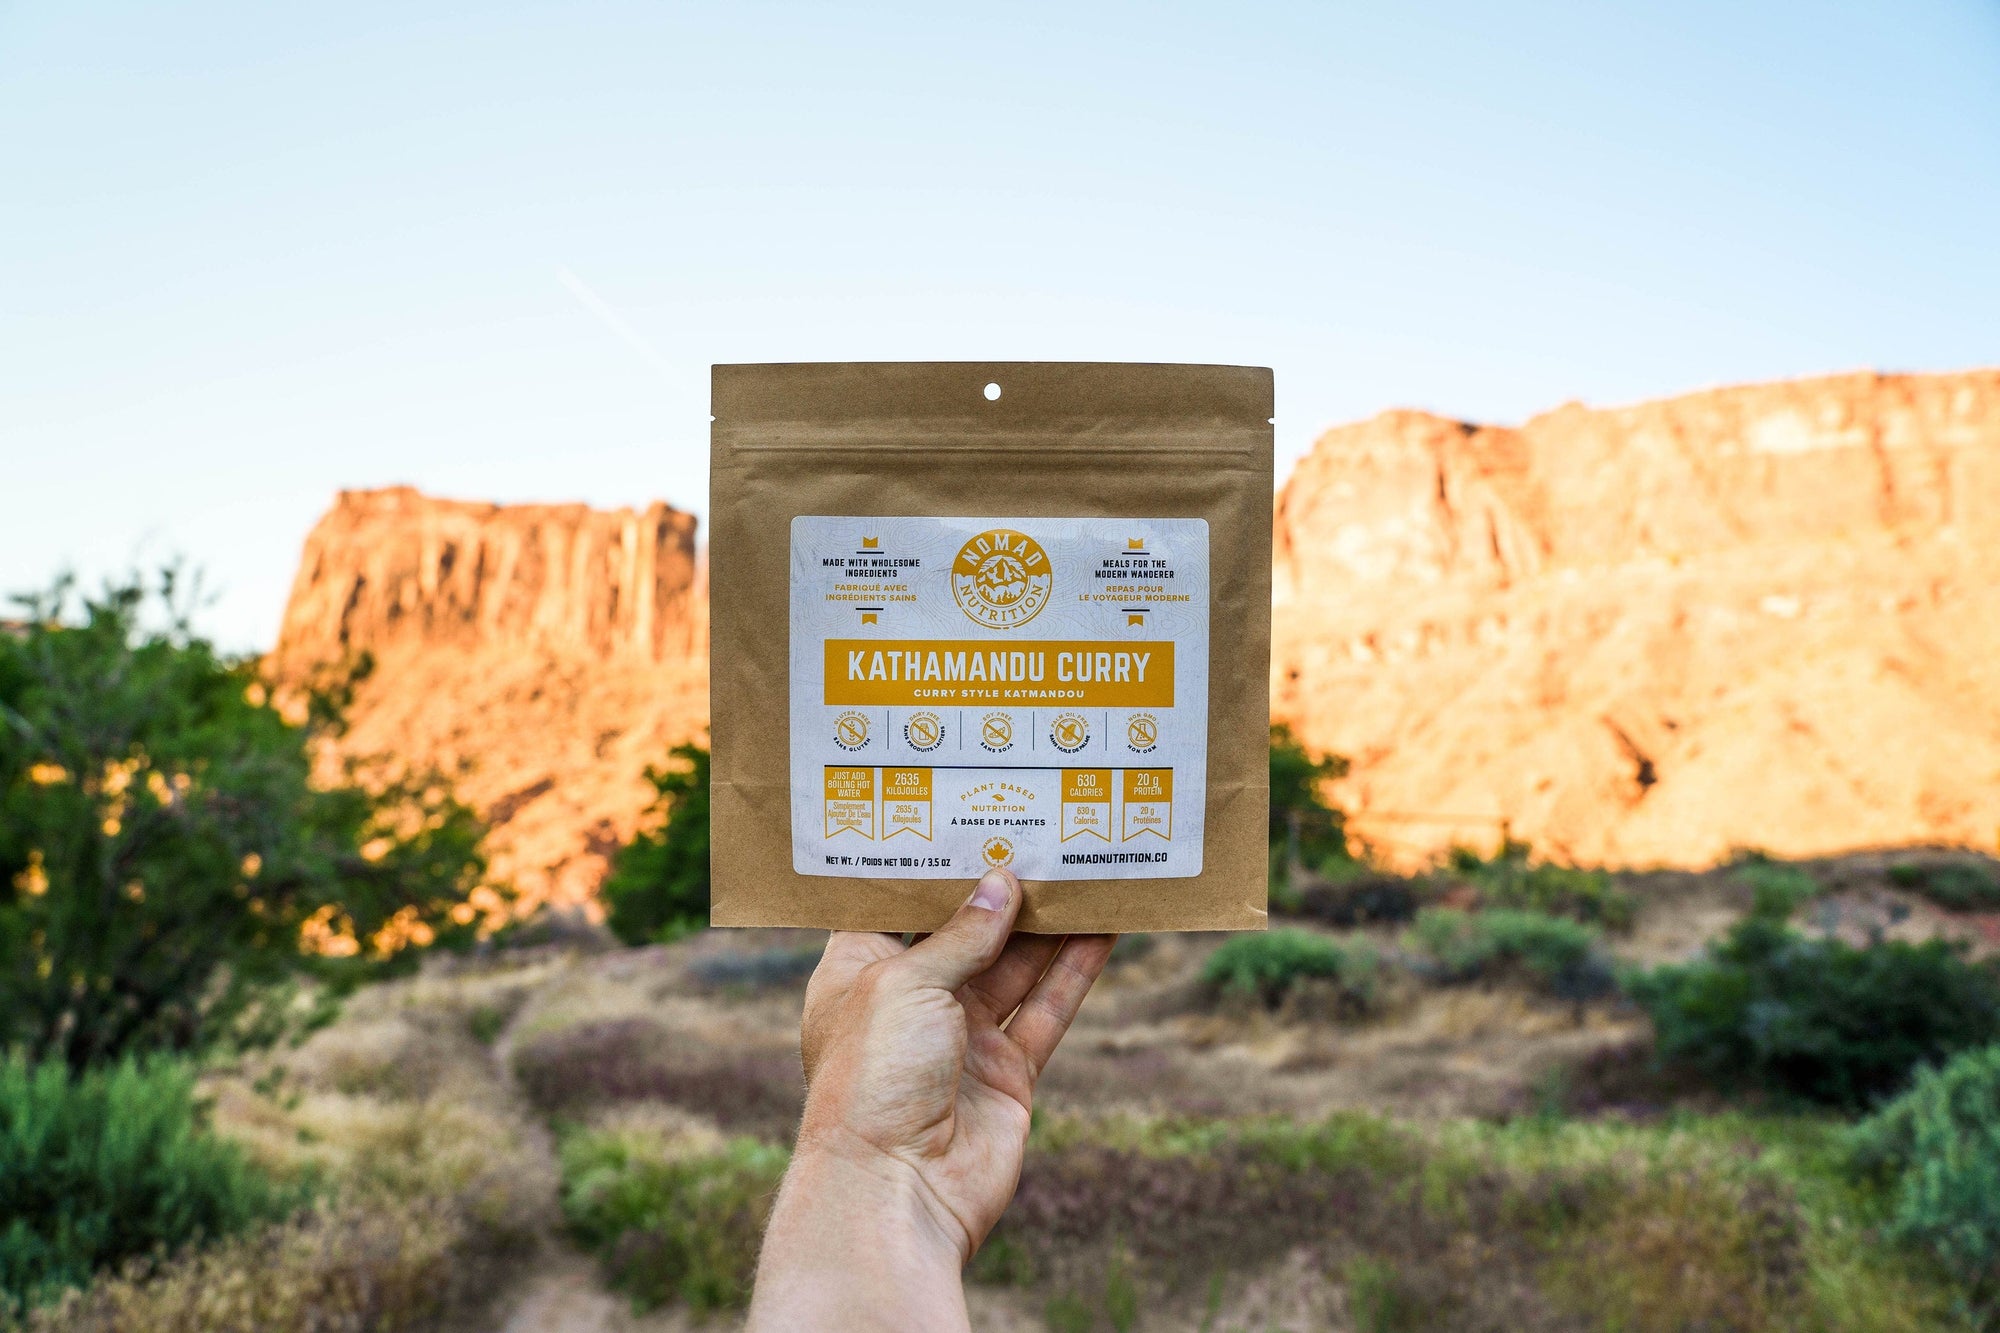 Nomad Nutrition Kathmandu Curry, vegan dehydrated adventure, camping, plant-based, gluten-free meal at Arches National Park